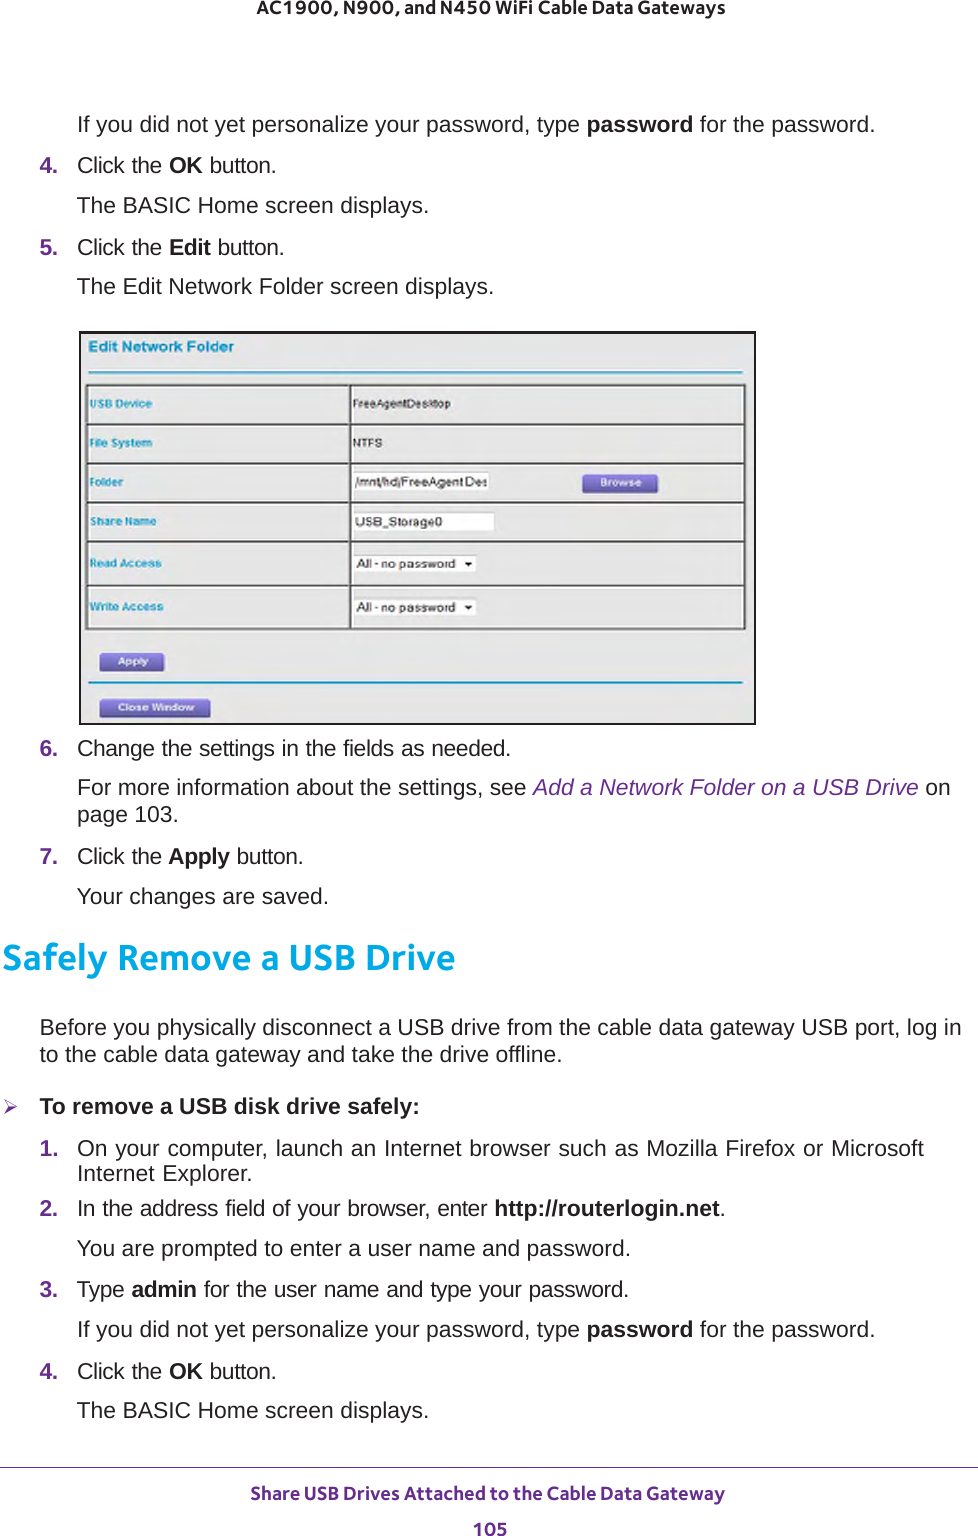 Share USB Drives Attached to the Cable Data Gateway 105 AC1900, N900, and N450 WiFi Cable Data GatewaysIf you did not yet personalize your password, type password for the password.4.  Click the OK button. The BASIC Home screen displays.5.  Click the Edit button.The Edit Network Folder screen displays.6.  Change the settings in the fields as needed.For more information about the settings, see Add a Network Folder on a USB Drive on page  103.7.  Click the Apply button.Your changes are saved.Safely Remove a USB DriveBefore you physically disconnect a USB drive from the cable data gateway USB port, log in to the cable data gateway and take the drive offline.To remove a USB disk drive safely: 1.  On your computer, launch an Internet browser such as Mozilla Firefox or Microsoft Internet Explorer. 2.  In the address field of your browser, enter http://routerlogin.net.You are prompted to enter a user name and password.3.  Type admin for the user name and type your password.If you did not yet personalize your password, type password for the password.4.  Click the OK button. The BASIC Home screen displays.